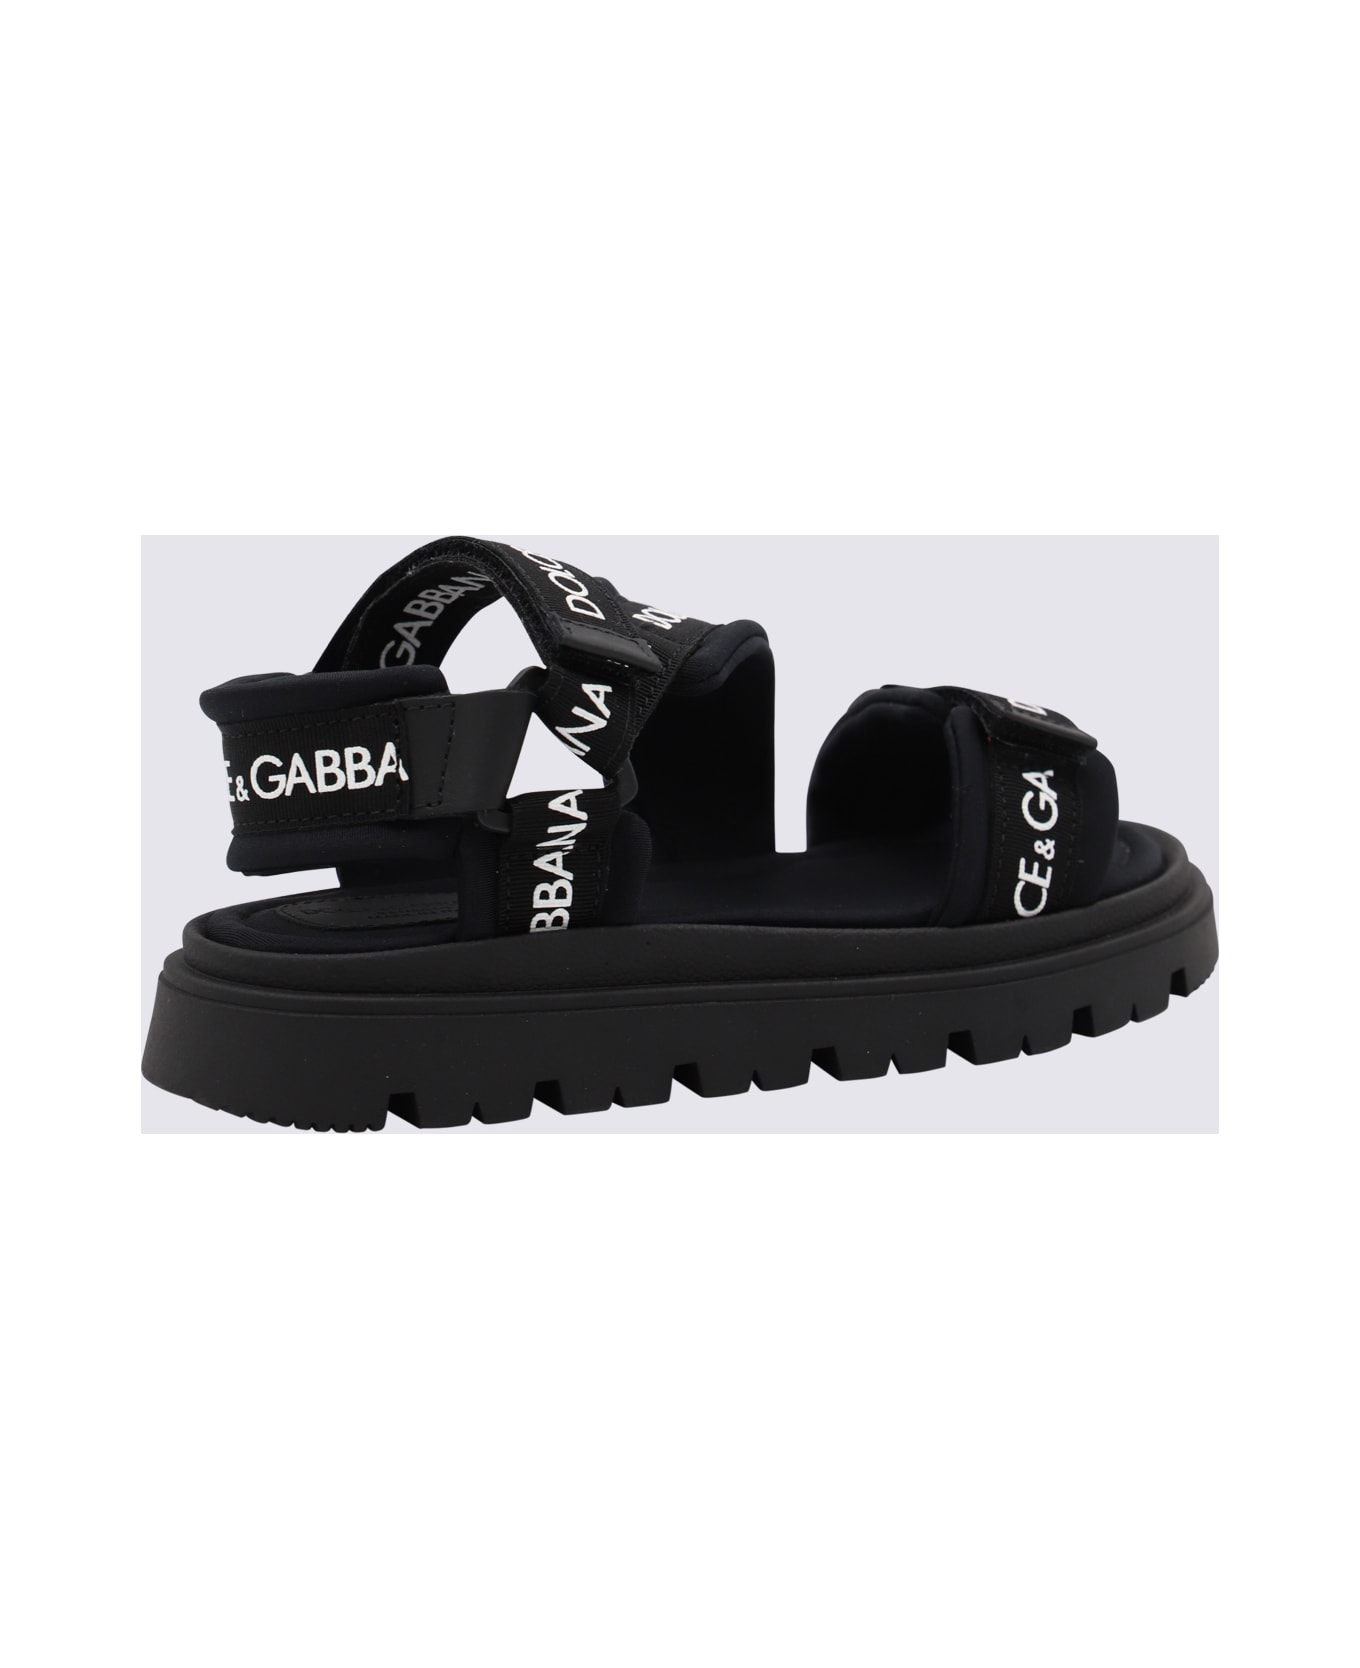 Air Max Motion 2 sneakers Black Cotton And Leather Sandals - Black